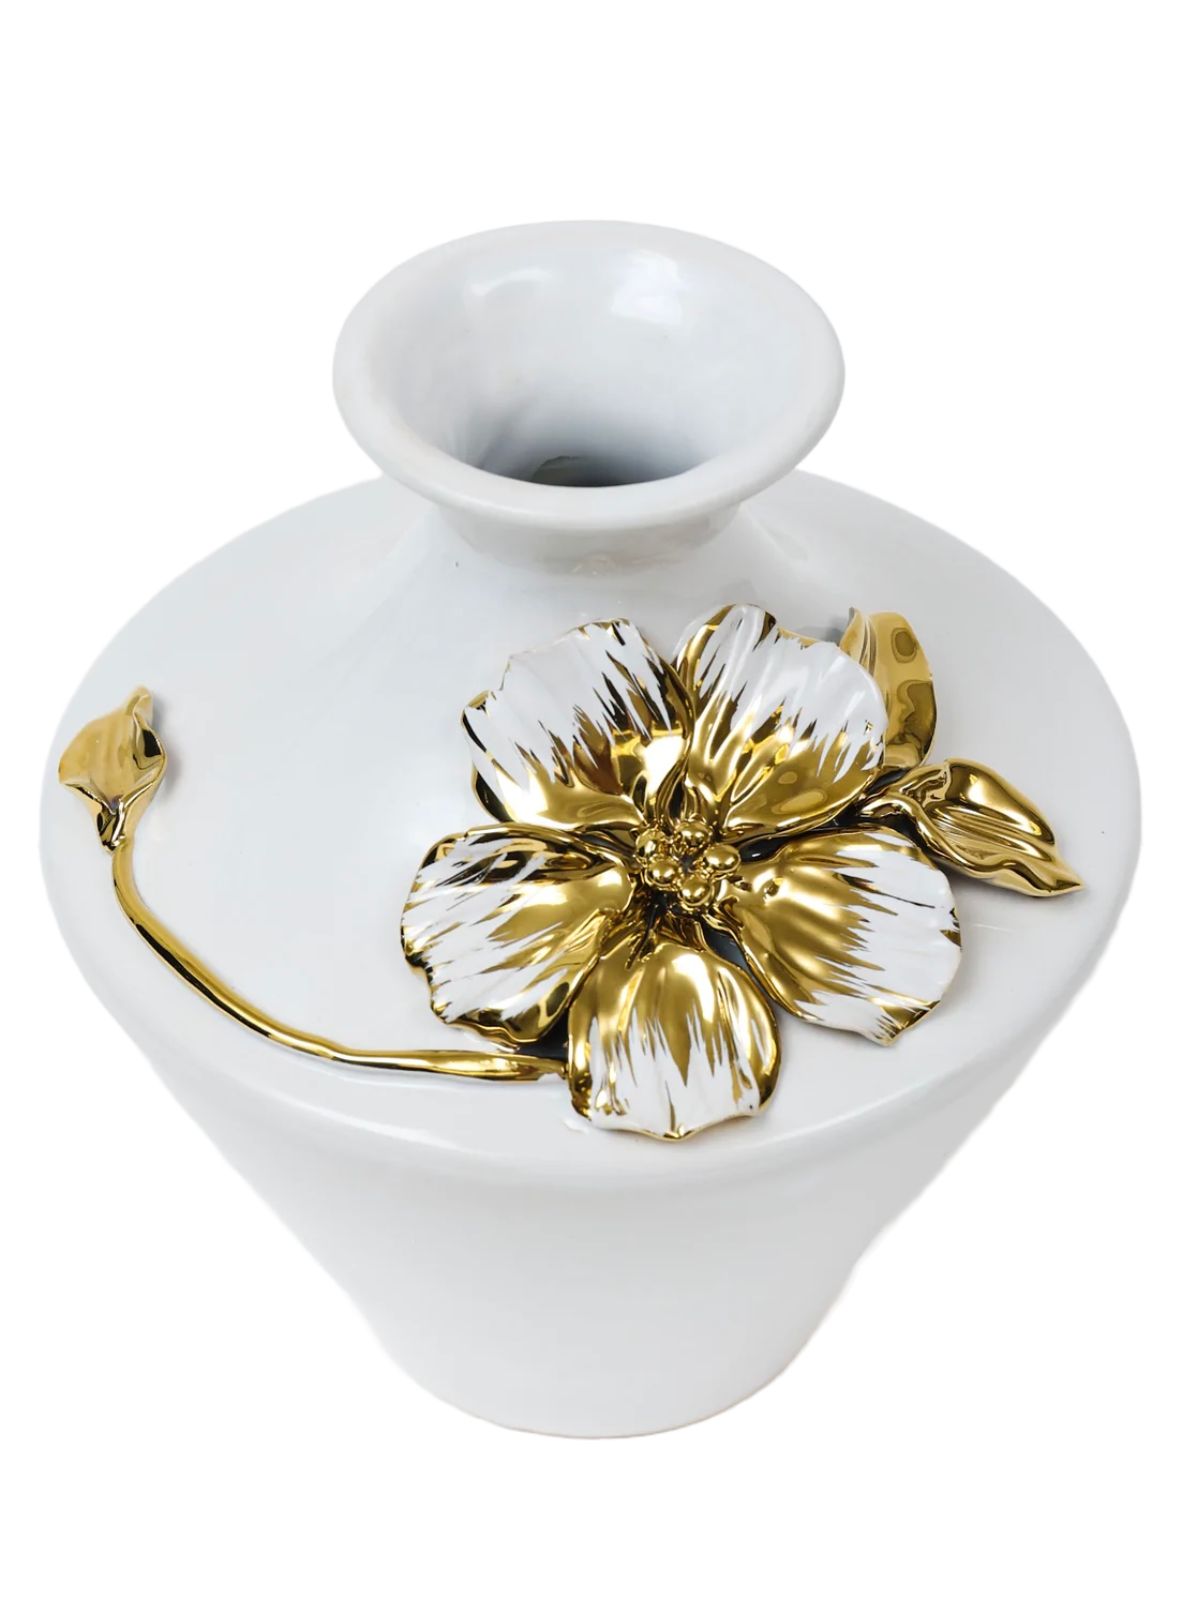 The astonishing Rosella White Vase with Gold Flower Design is is a must-have item! The white ceramic vase is enhanced by the bold 3D gold and white floral design! 